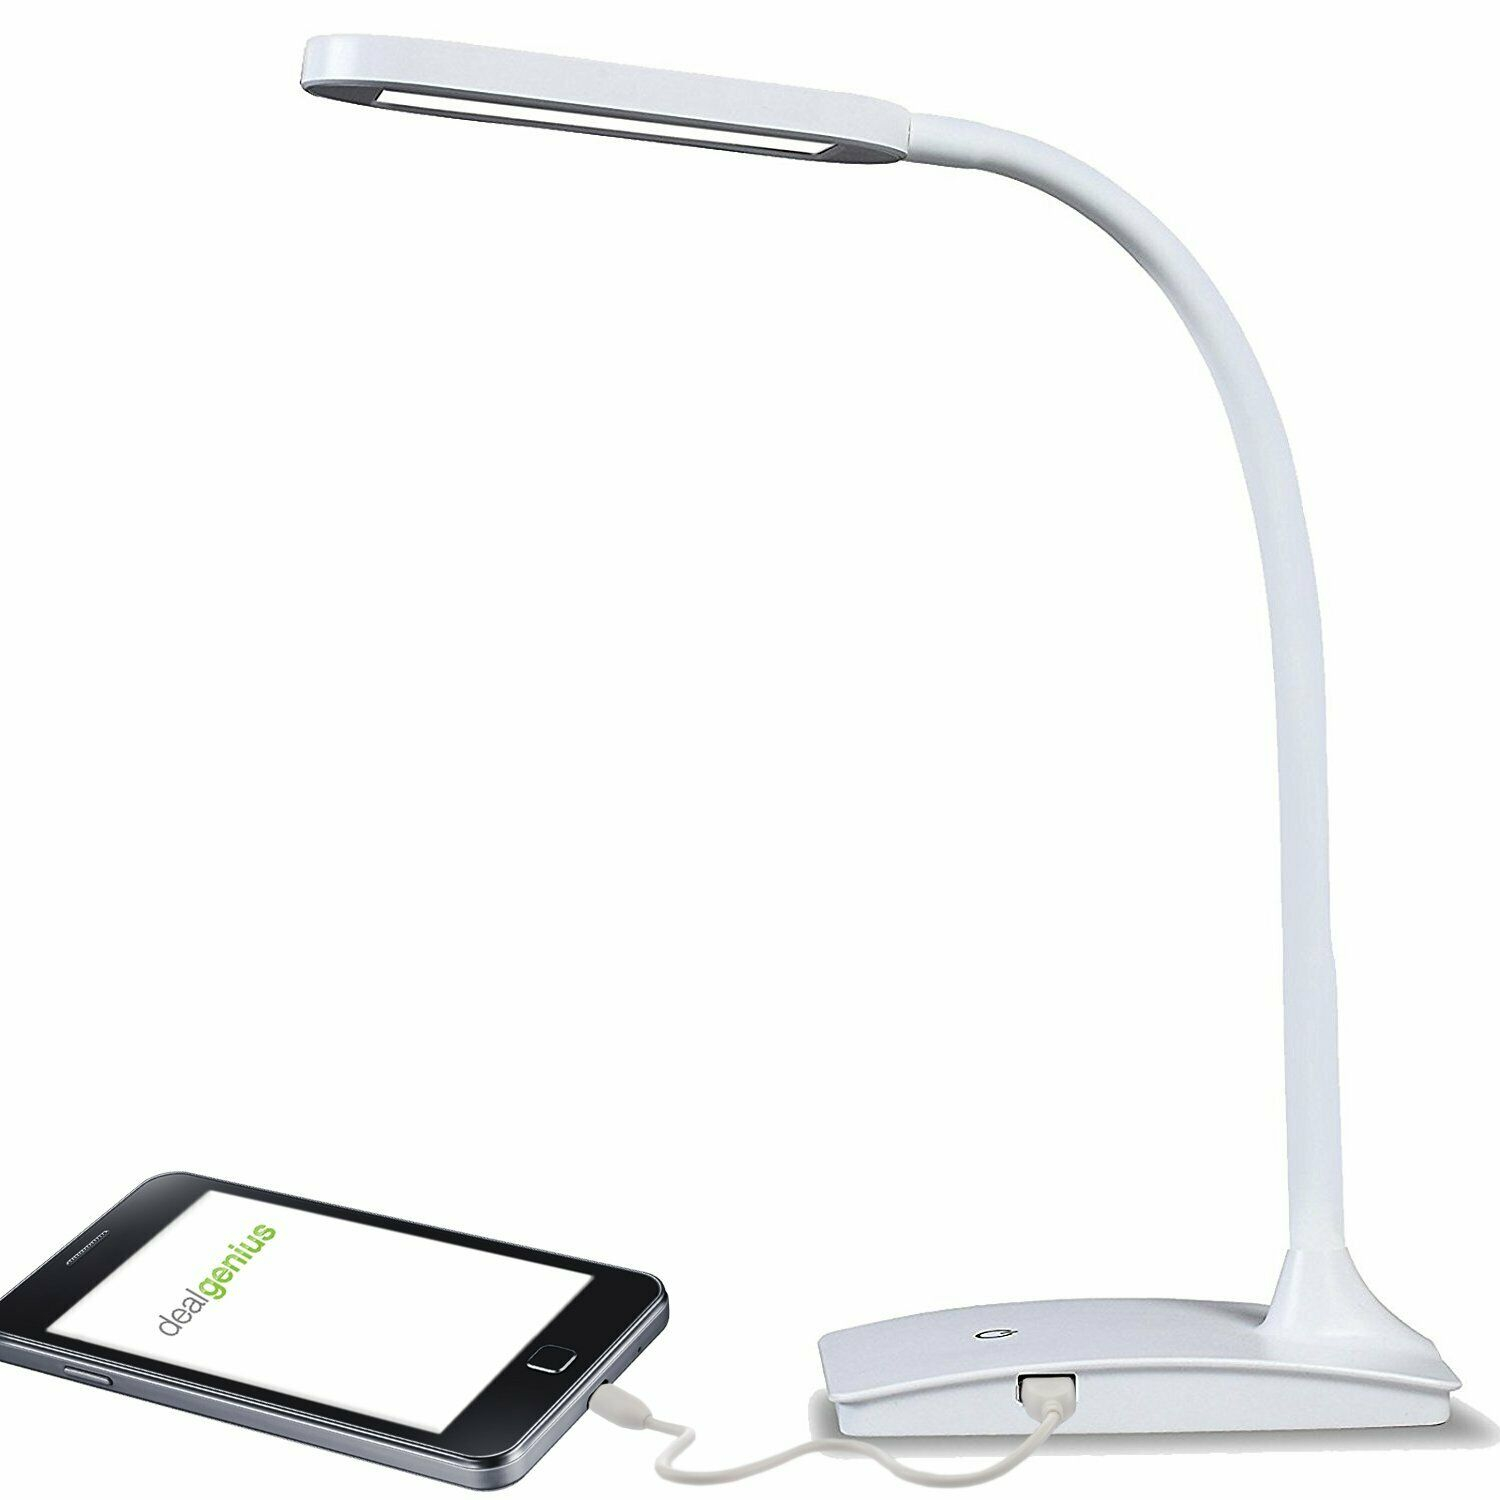 Tw Lighting Ivy 40wt The Ivy Led Desk Lamp With Usb Port 3 Way Touch Switch Wh with regard to size 1500 X 1500